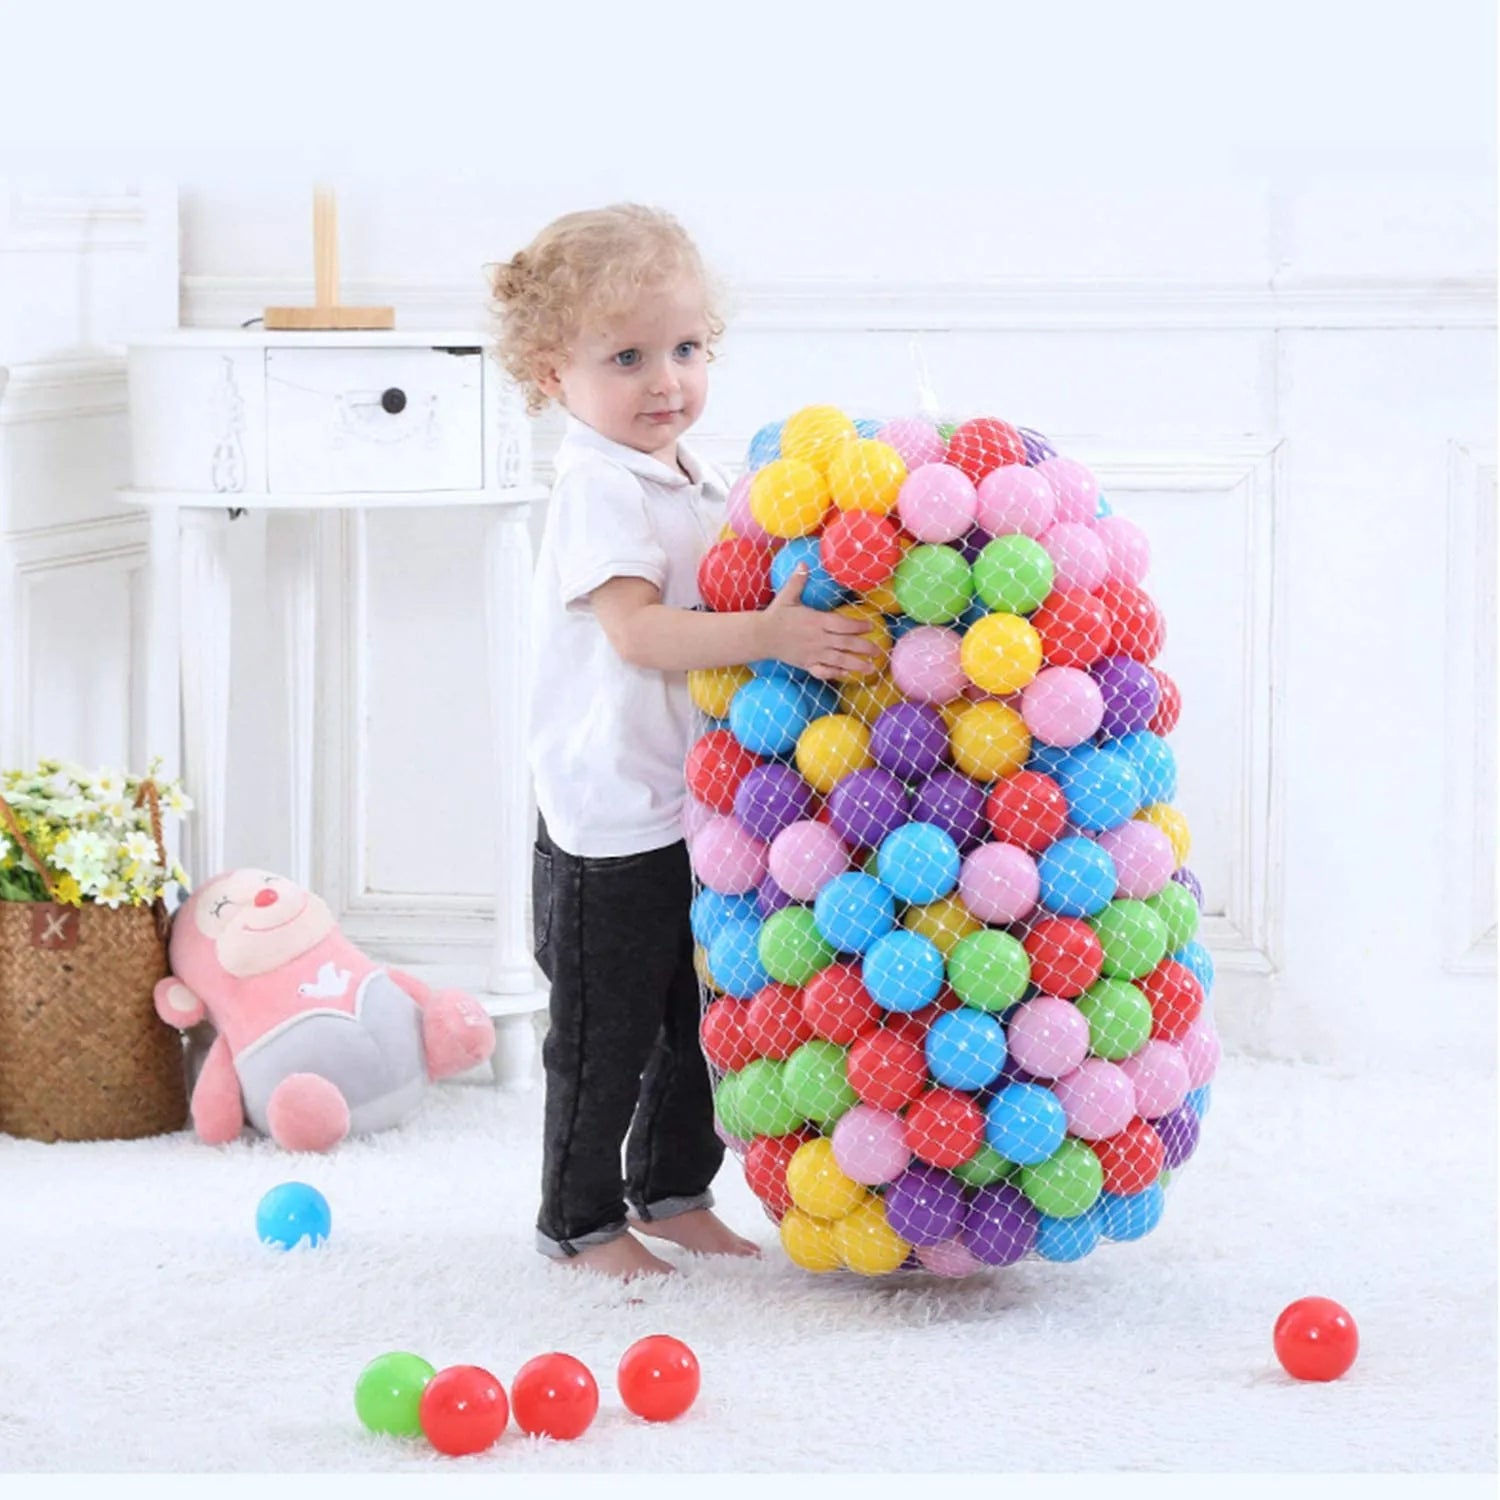 50Pcs 55MM Baby Plastic Balls Water Pool Ocean Ball Games for Children Swim Pit Play House Outdoors Sport Ball Tents Baby Toys